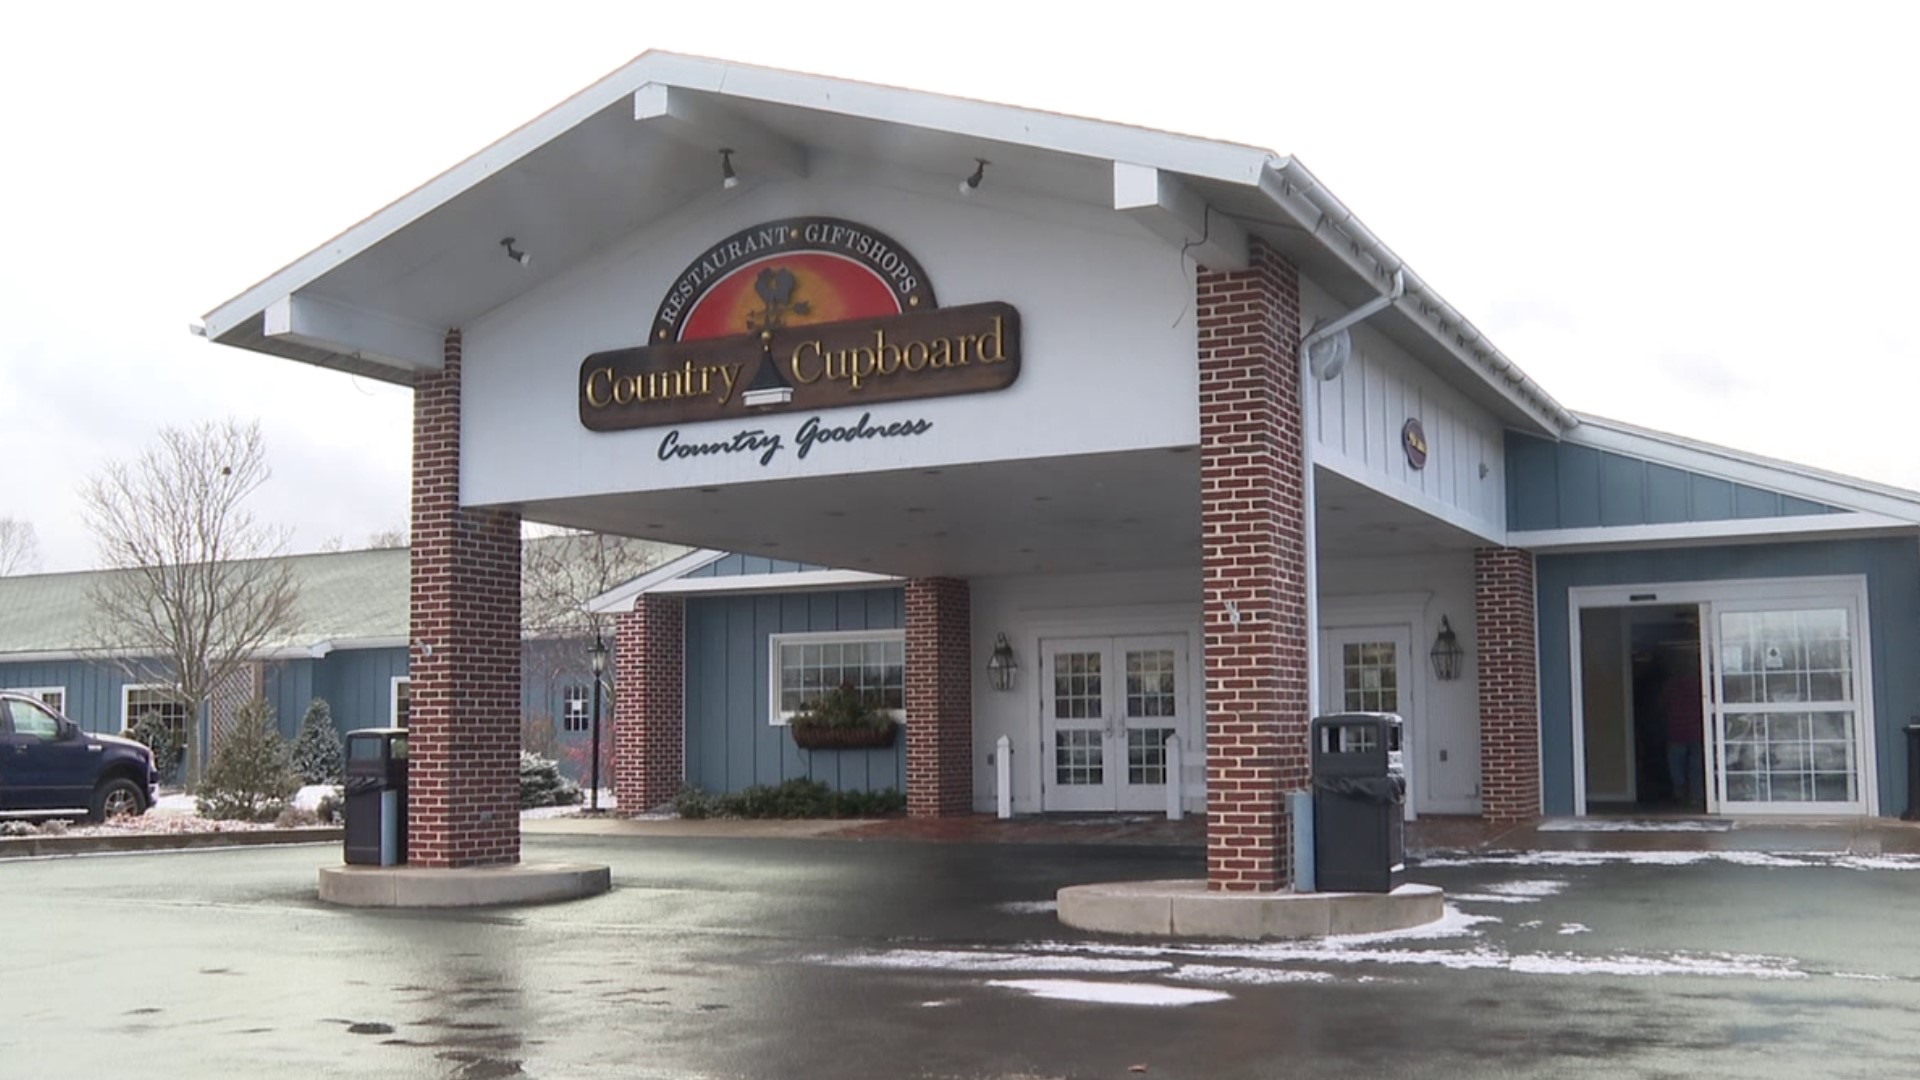 Saturday was the final day the restaurant in Union County would be open for dining.